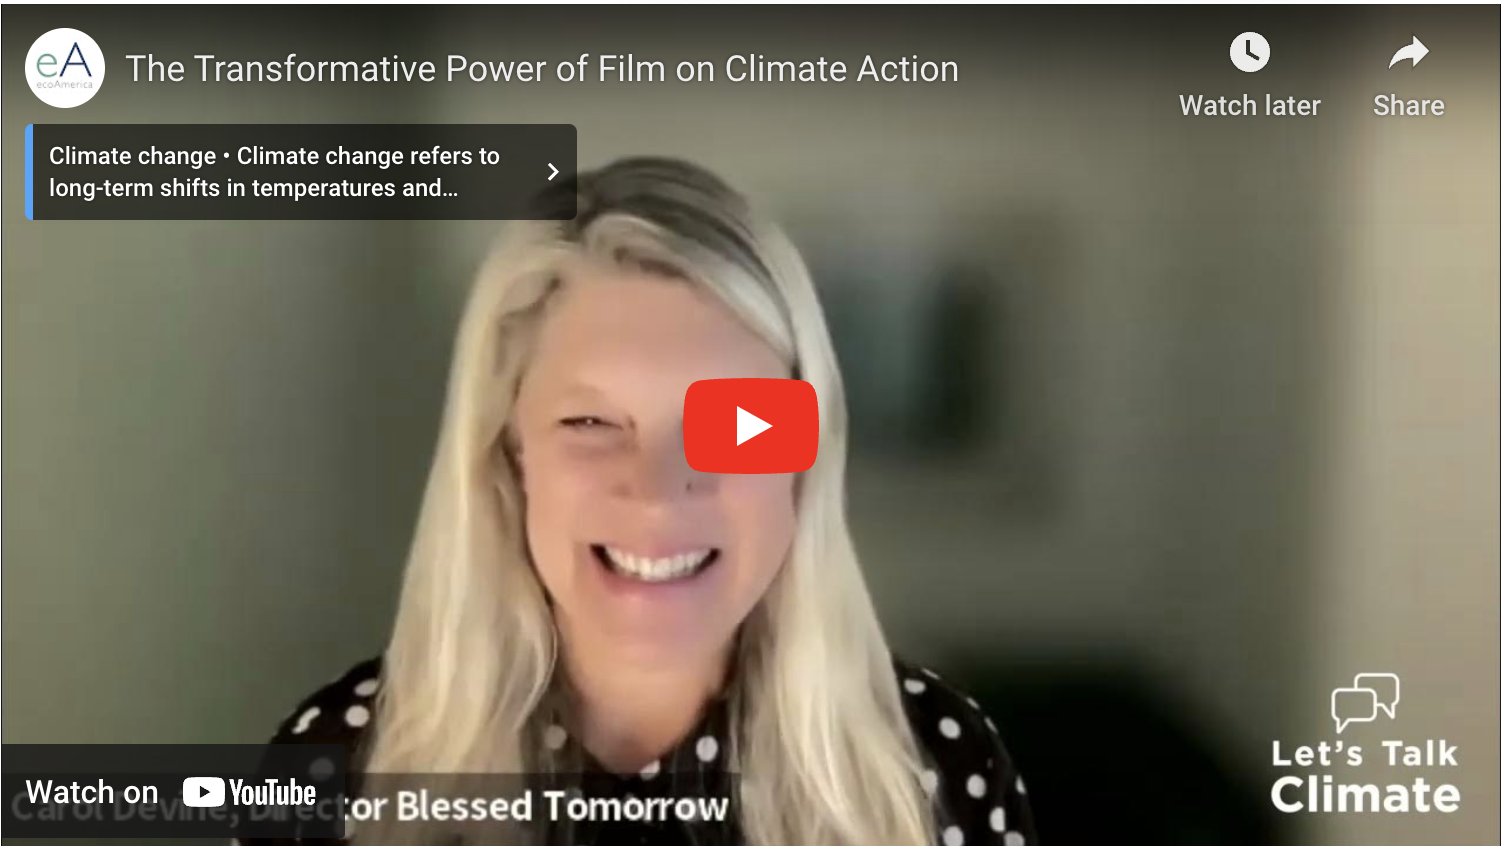 The Transformative Power of Film on Climate Action